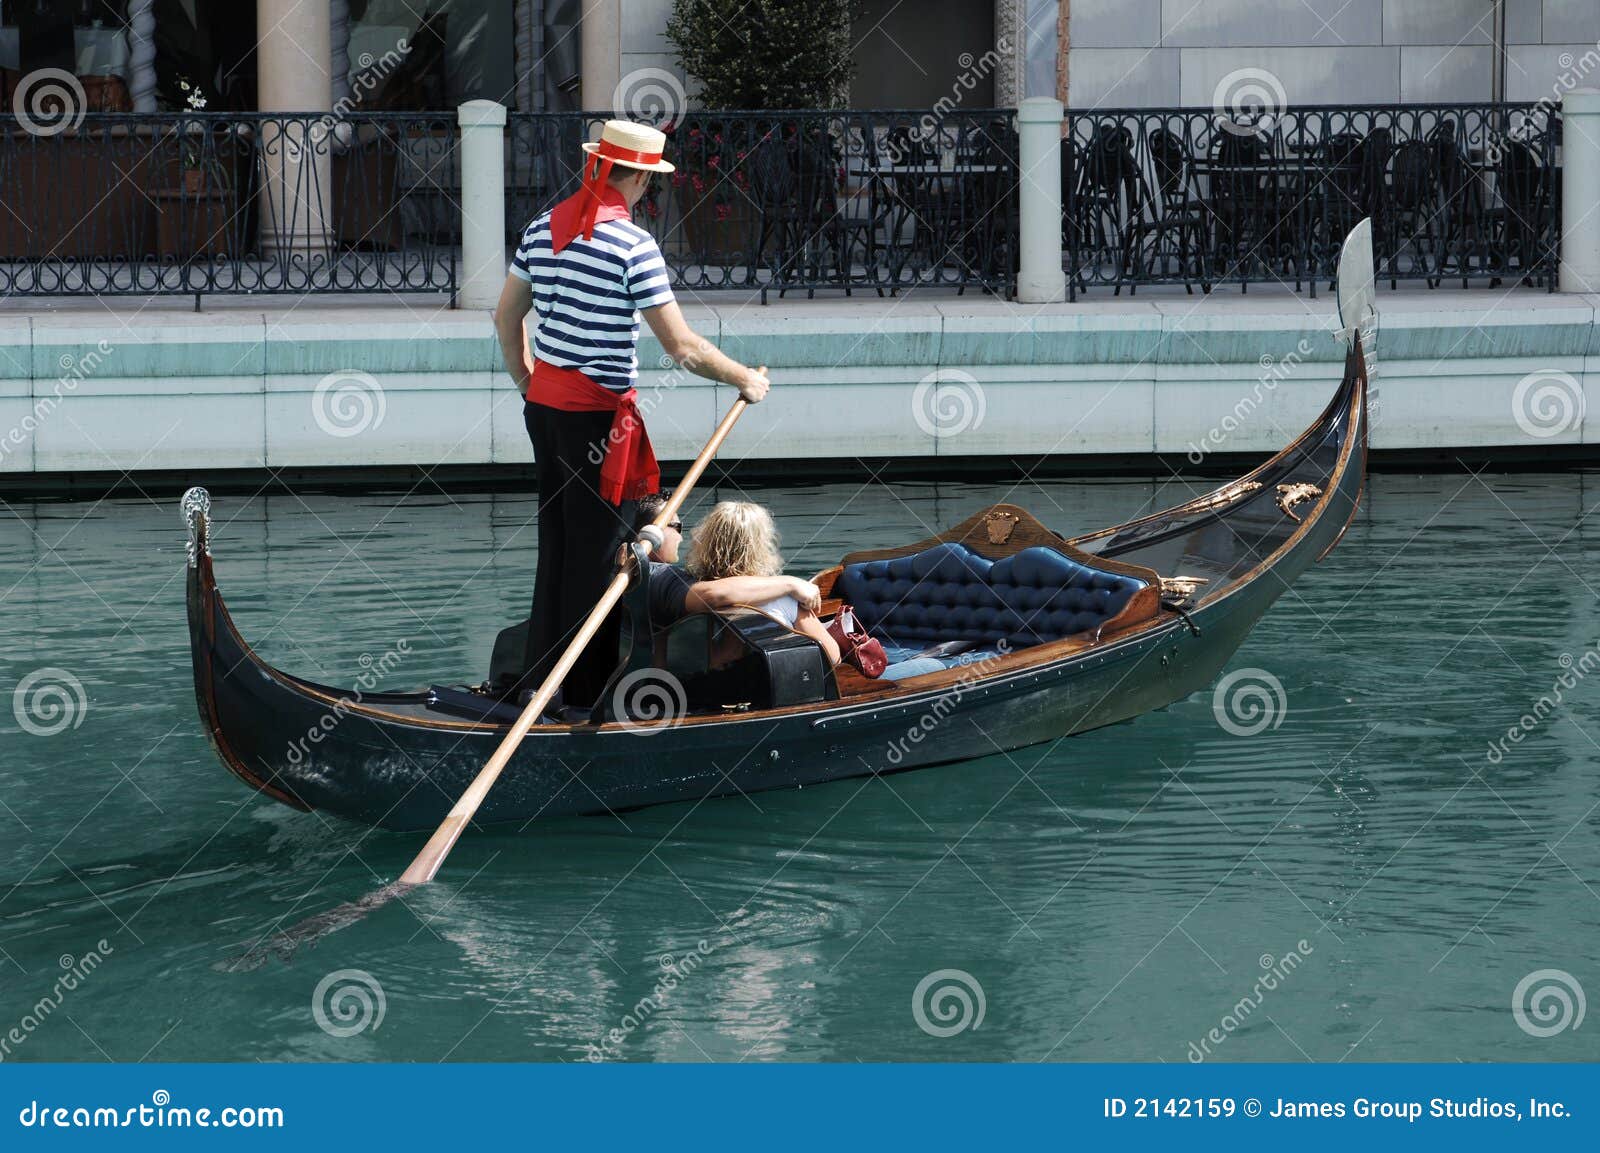 Couple having a romantic ride down a canal in a gondola.